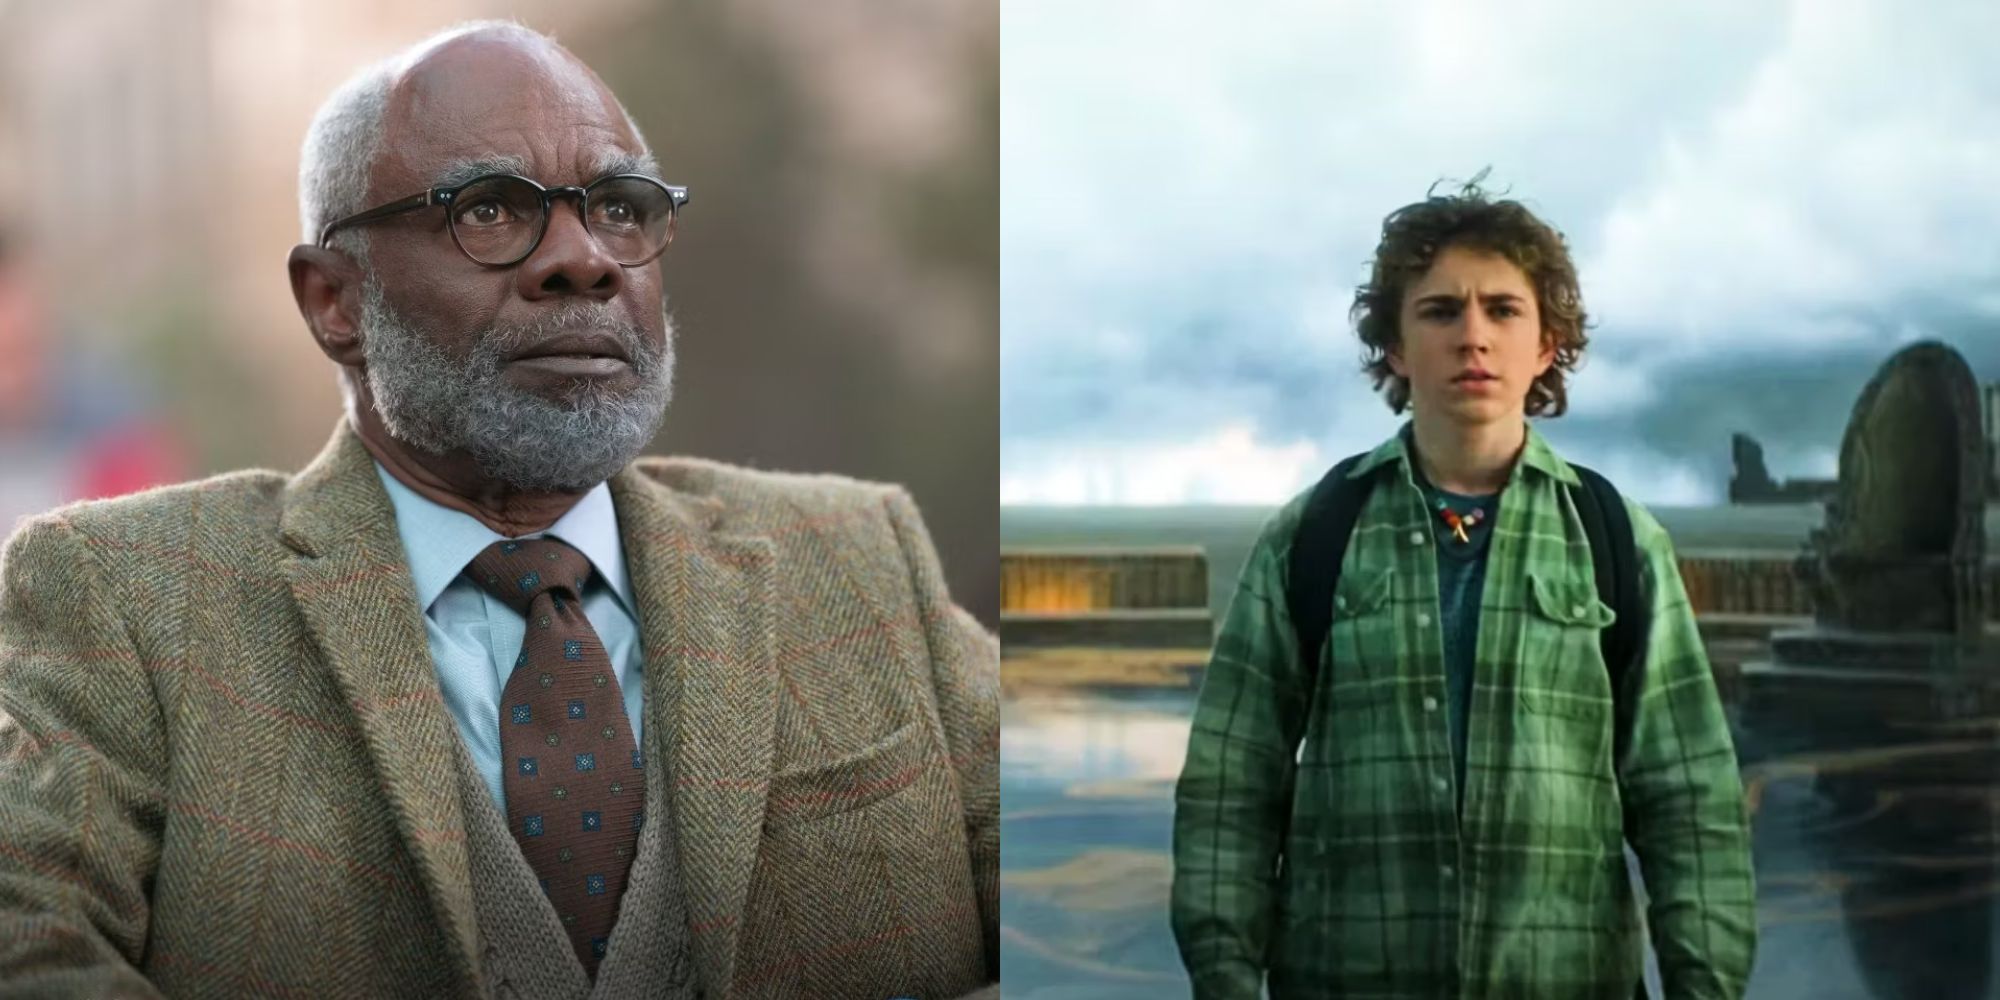 Glynn Turman as Chiron and Walker Scobell as Percy in Percy Jackson